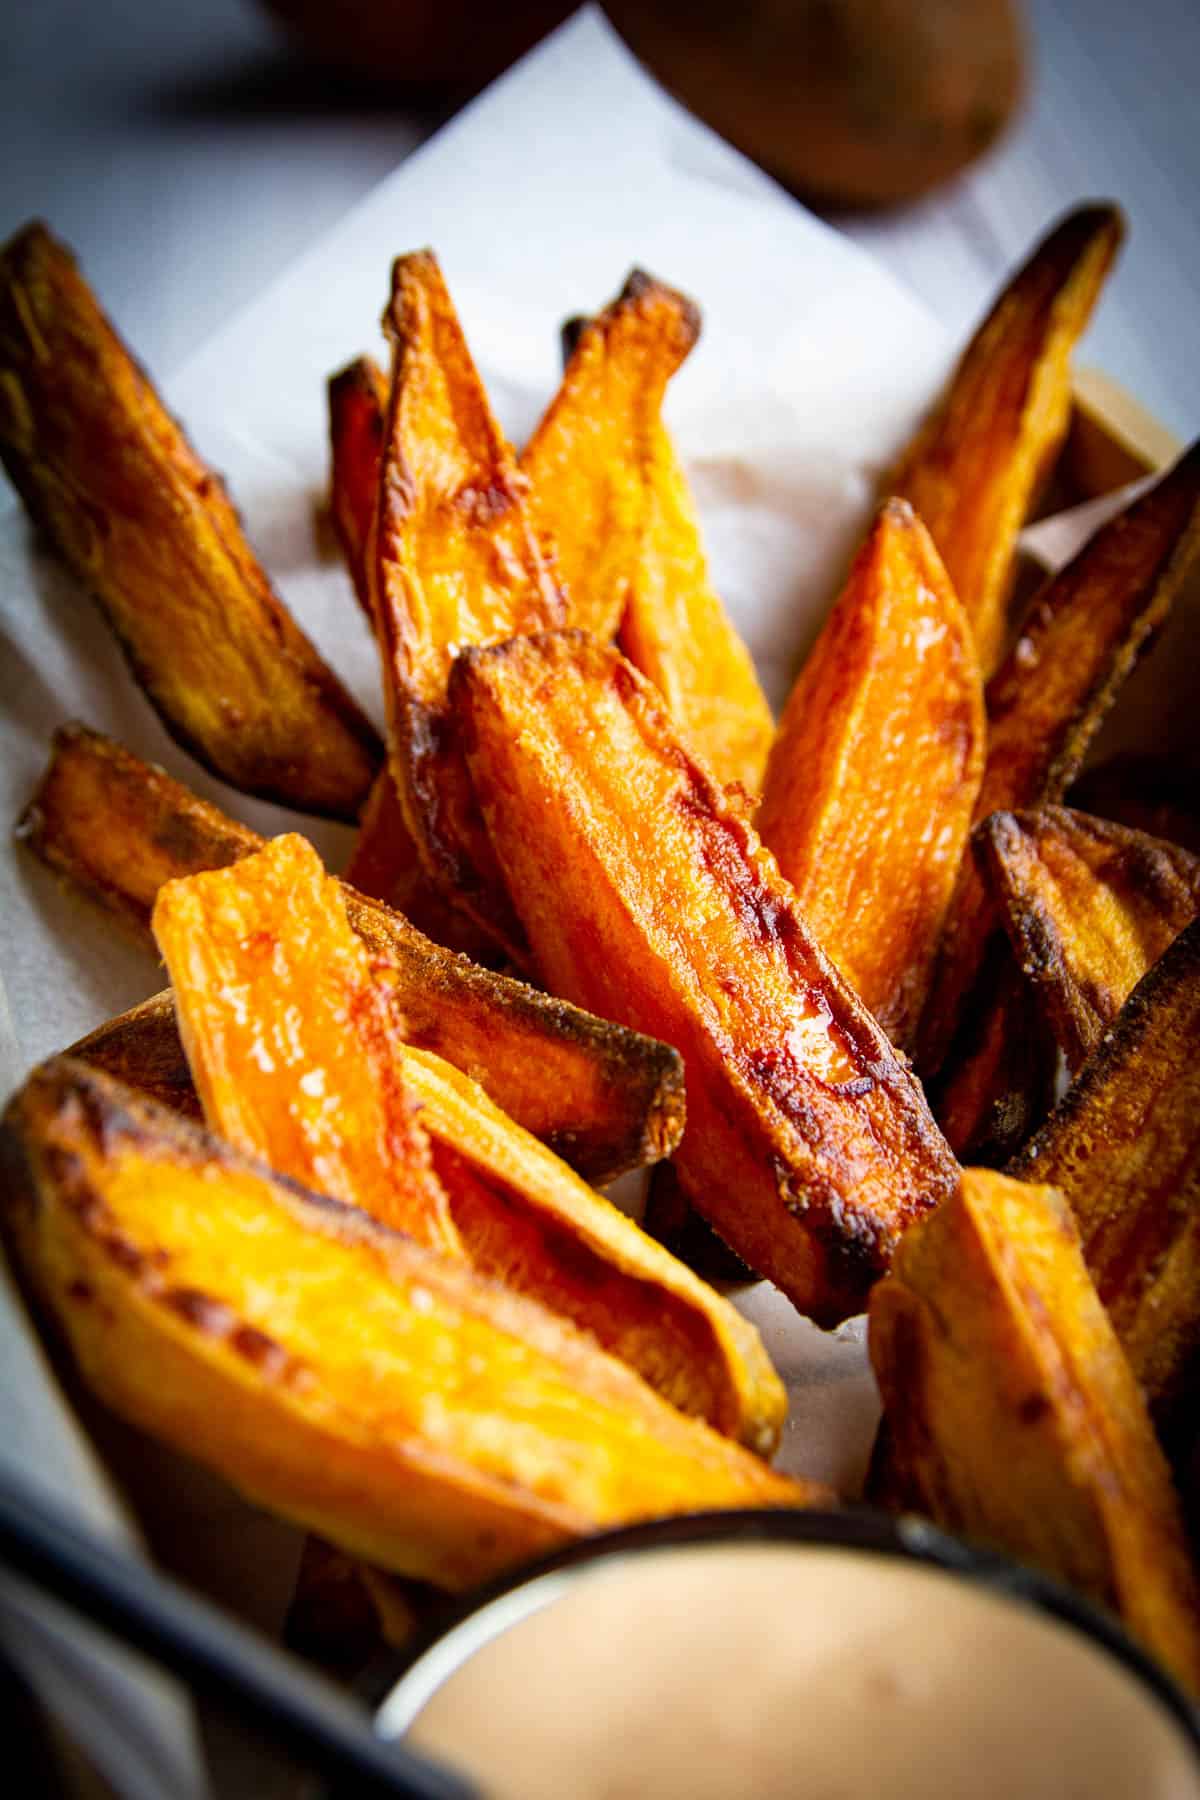 Crispy sweet potato wedges with spicy mayo on the side.